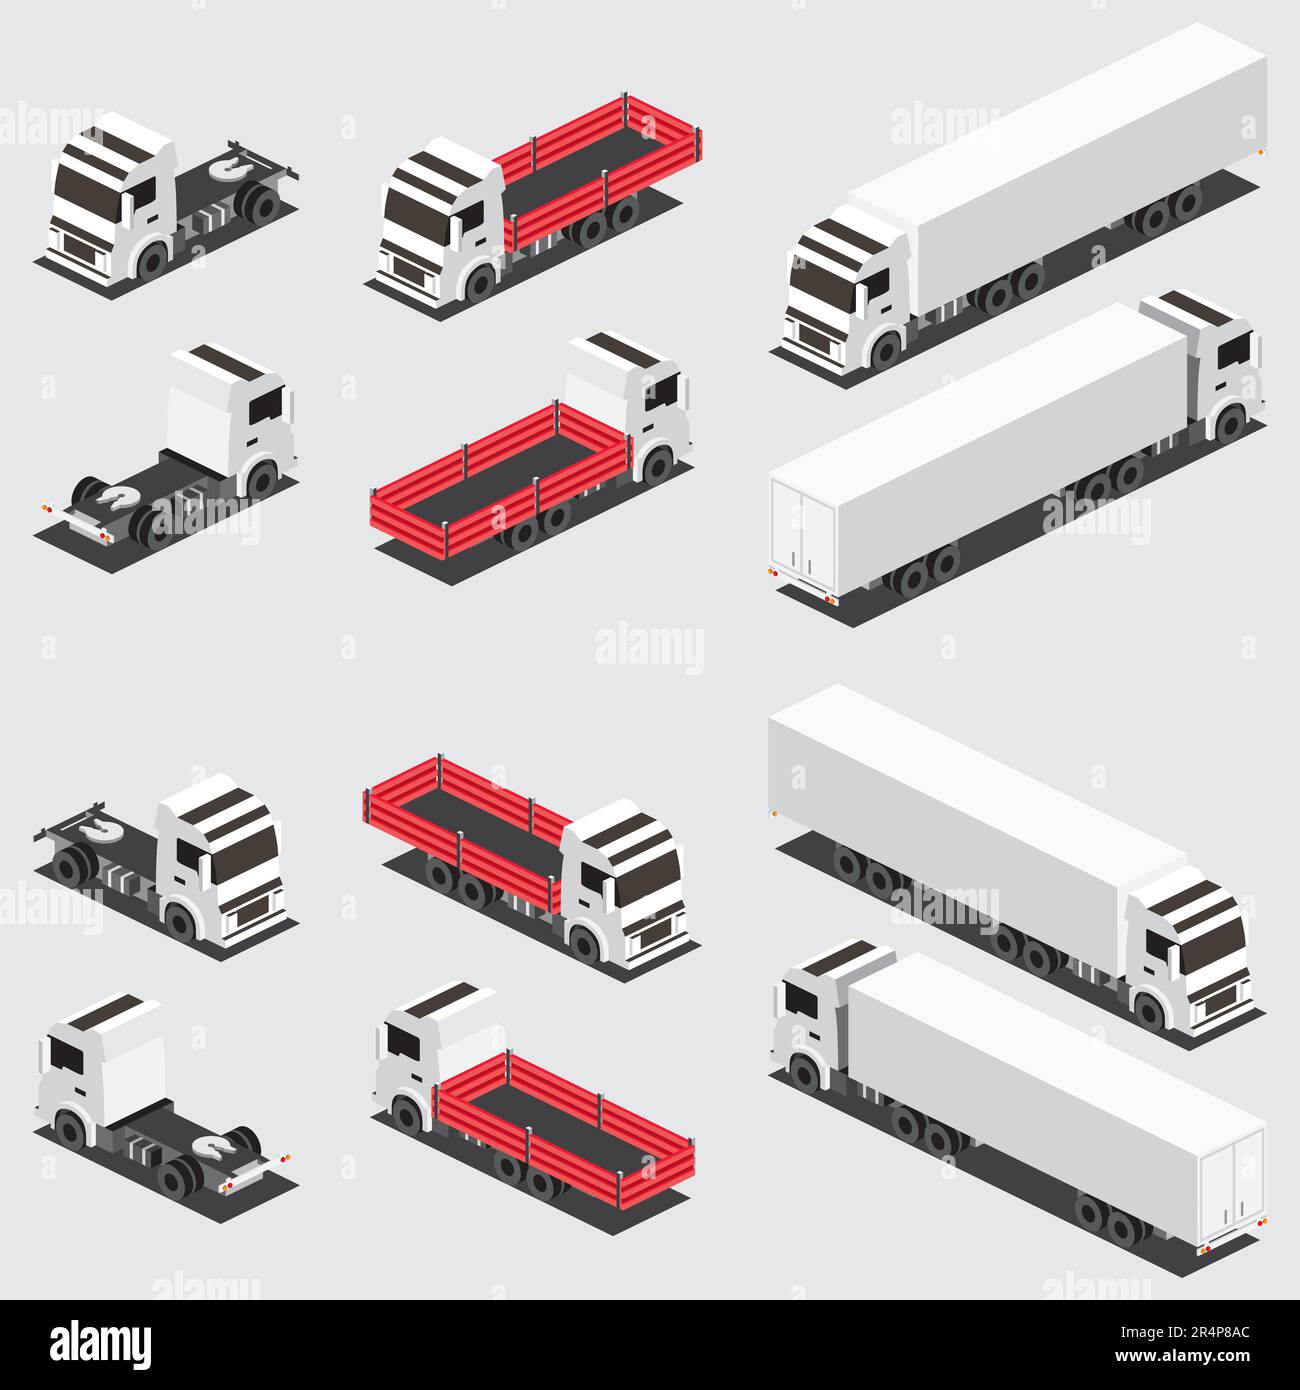 Isometric Red Flatbed Cargo Truck and Truck Trailer with Container. Icons Set. Commercial Transport. Logistics. Object for Infographics. Stock Vector